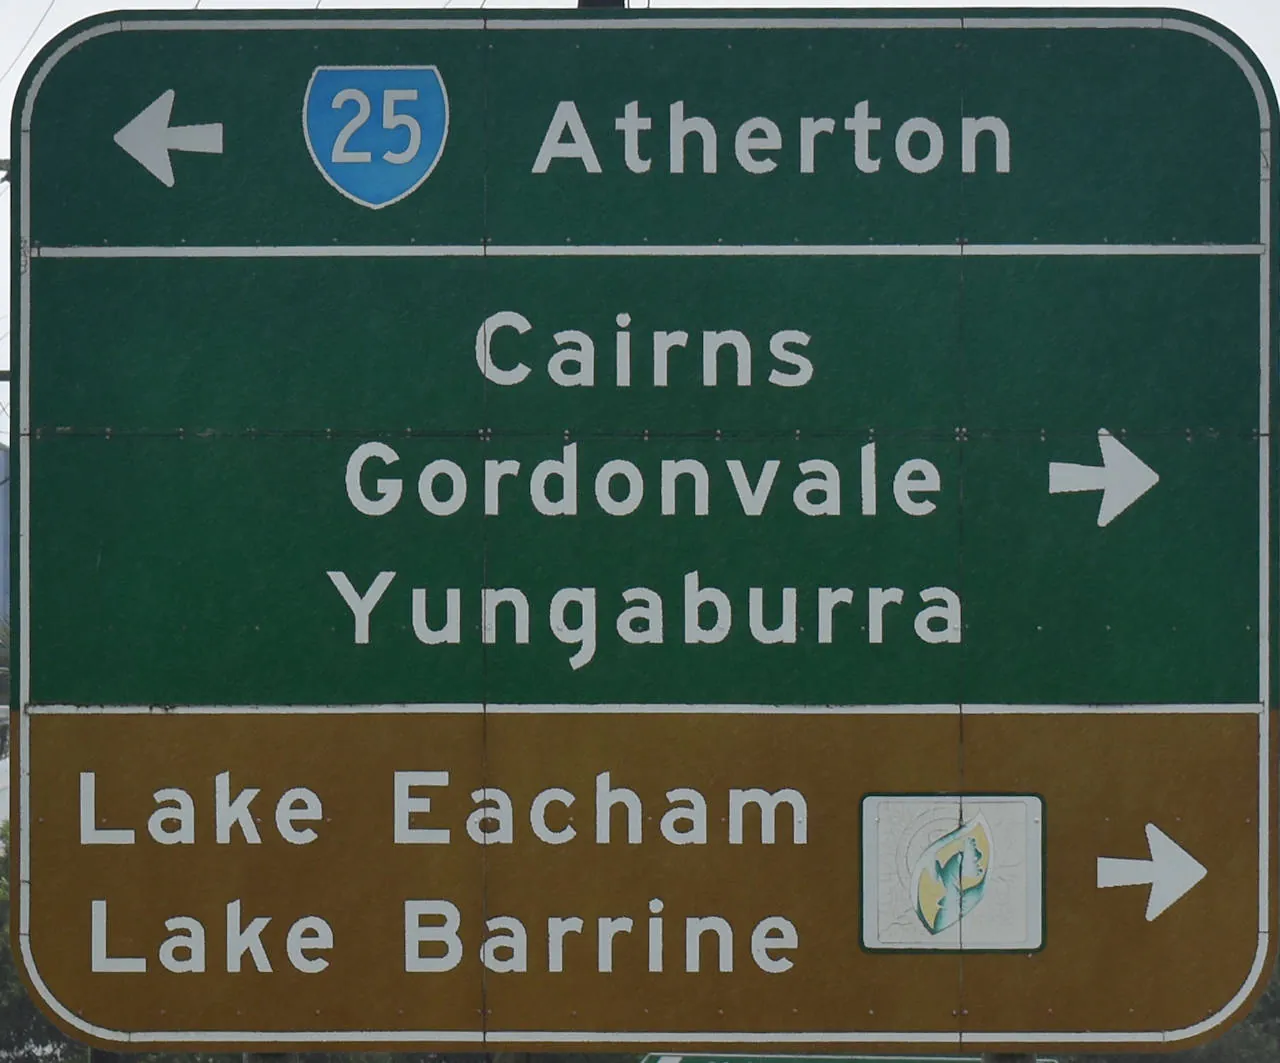 Brown sign for Lake Eacham and Lake Barrine, green sign for Atherton, Cairns, Gordonvale, and Yungaburra